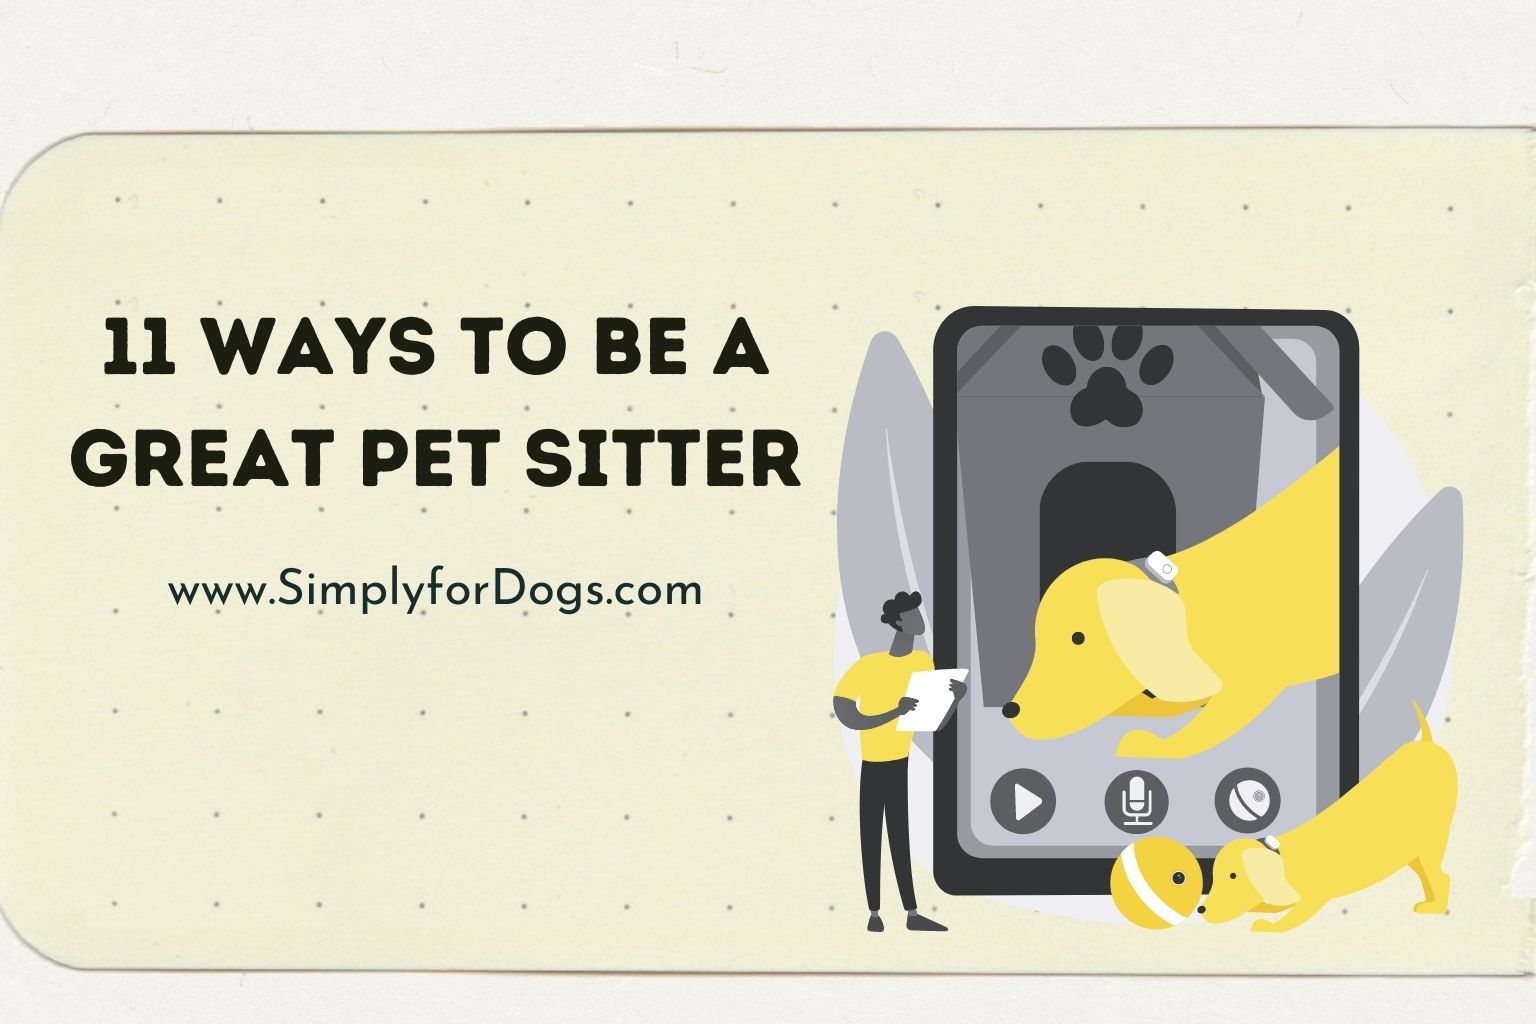 11 Ways to Be a Great Pet Sitter